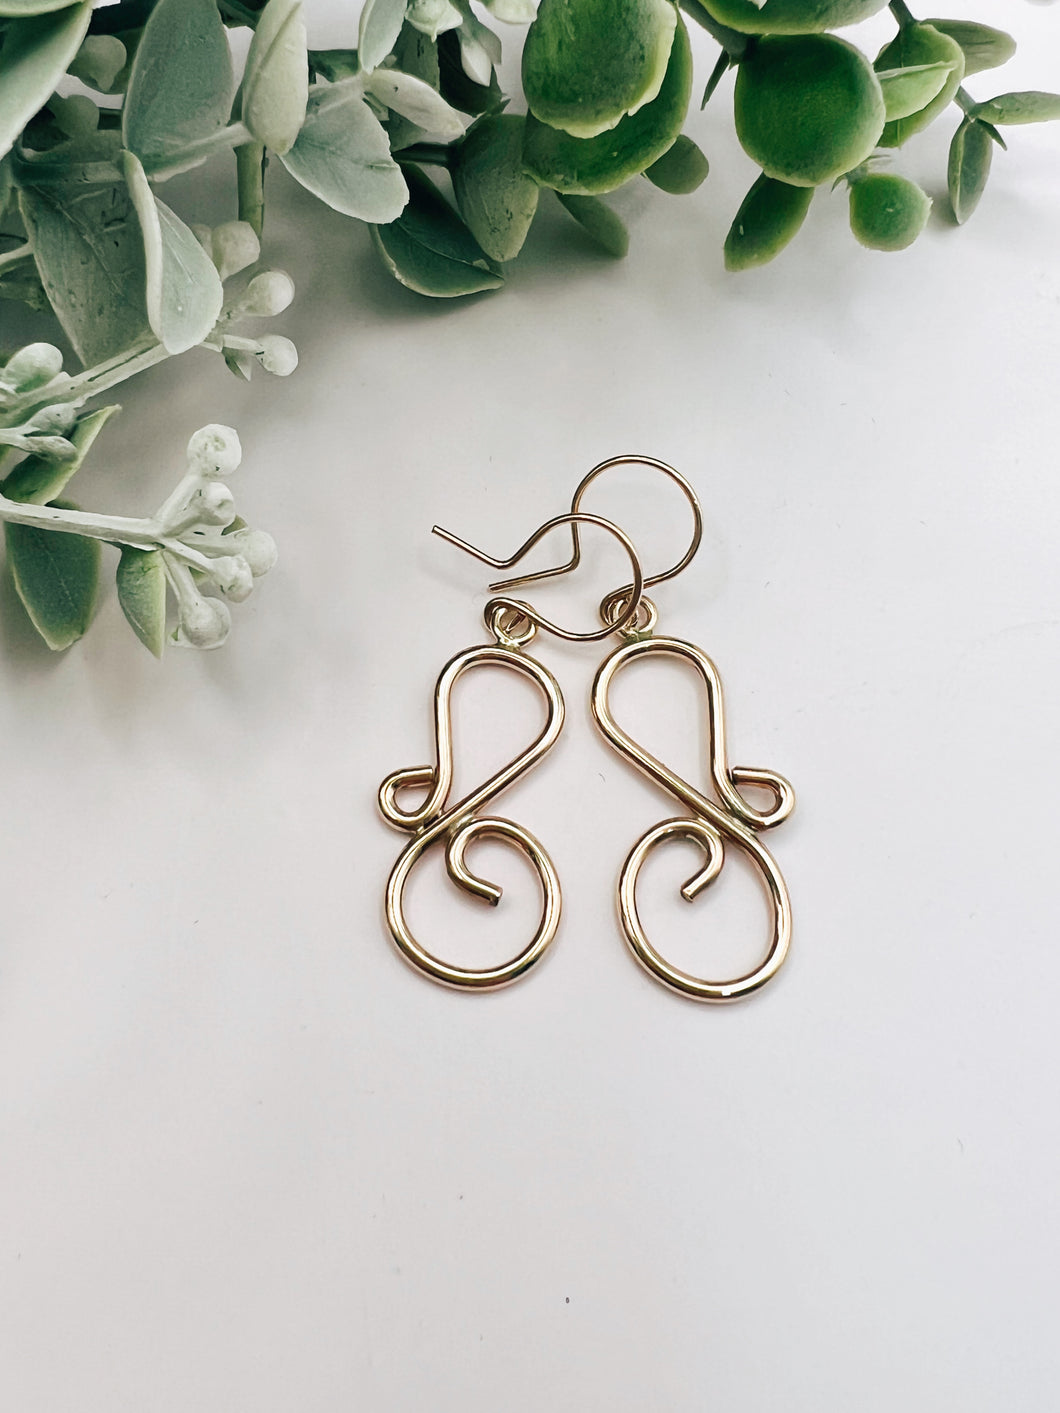 Chad Miller Metalsmith: Swirl Gold Filled Earrings